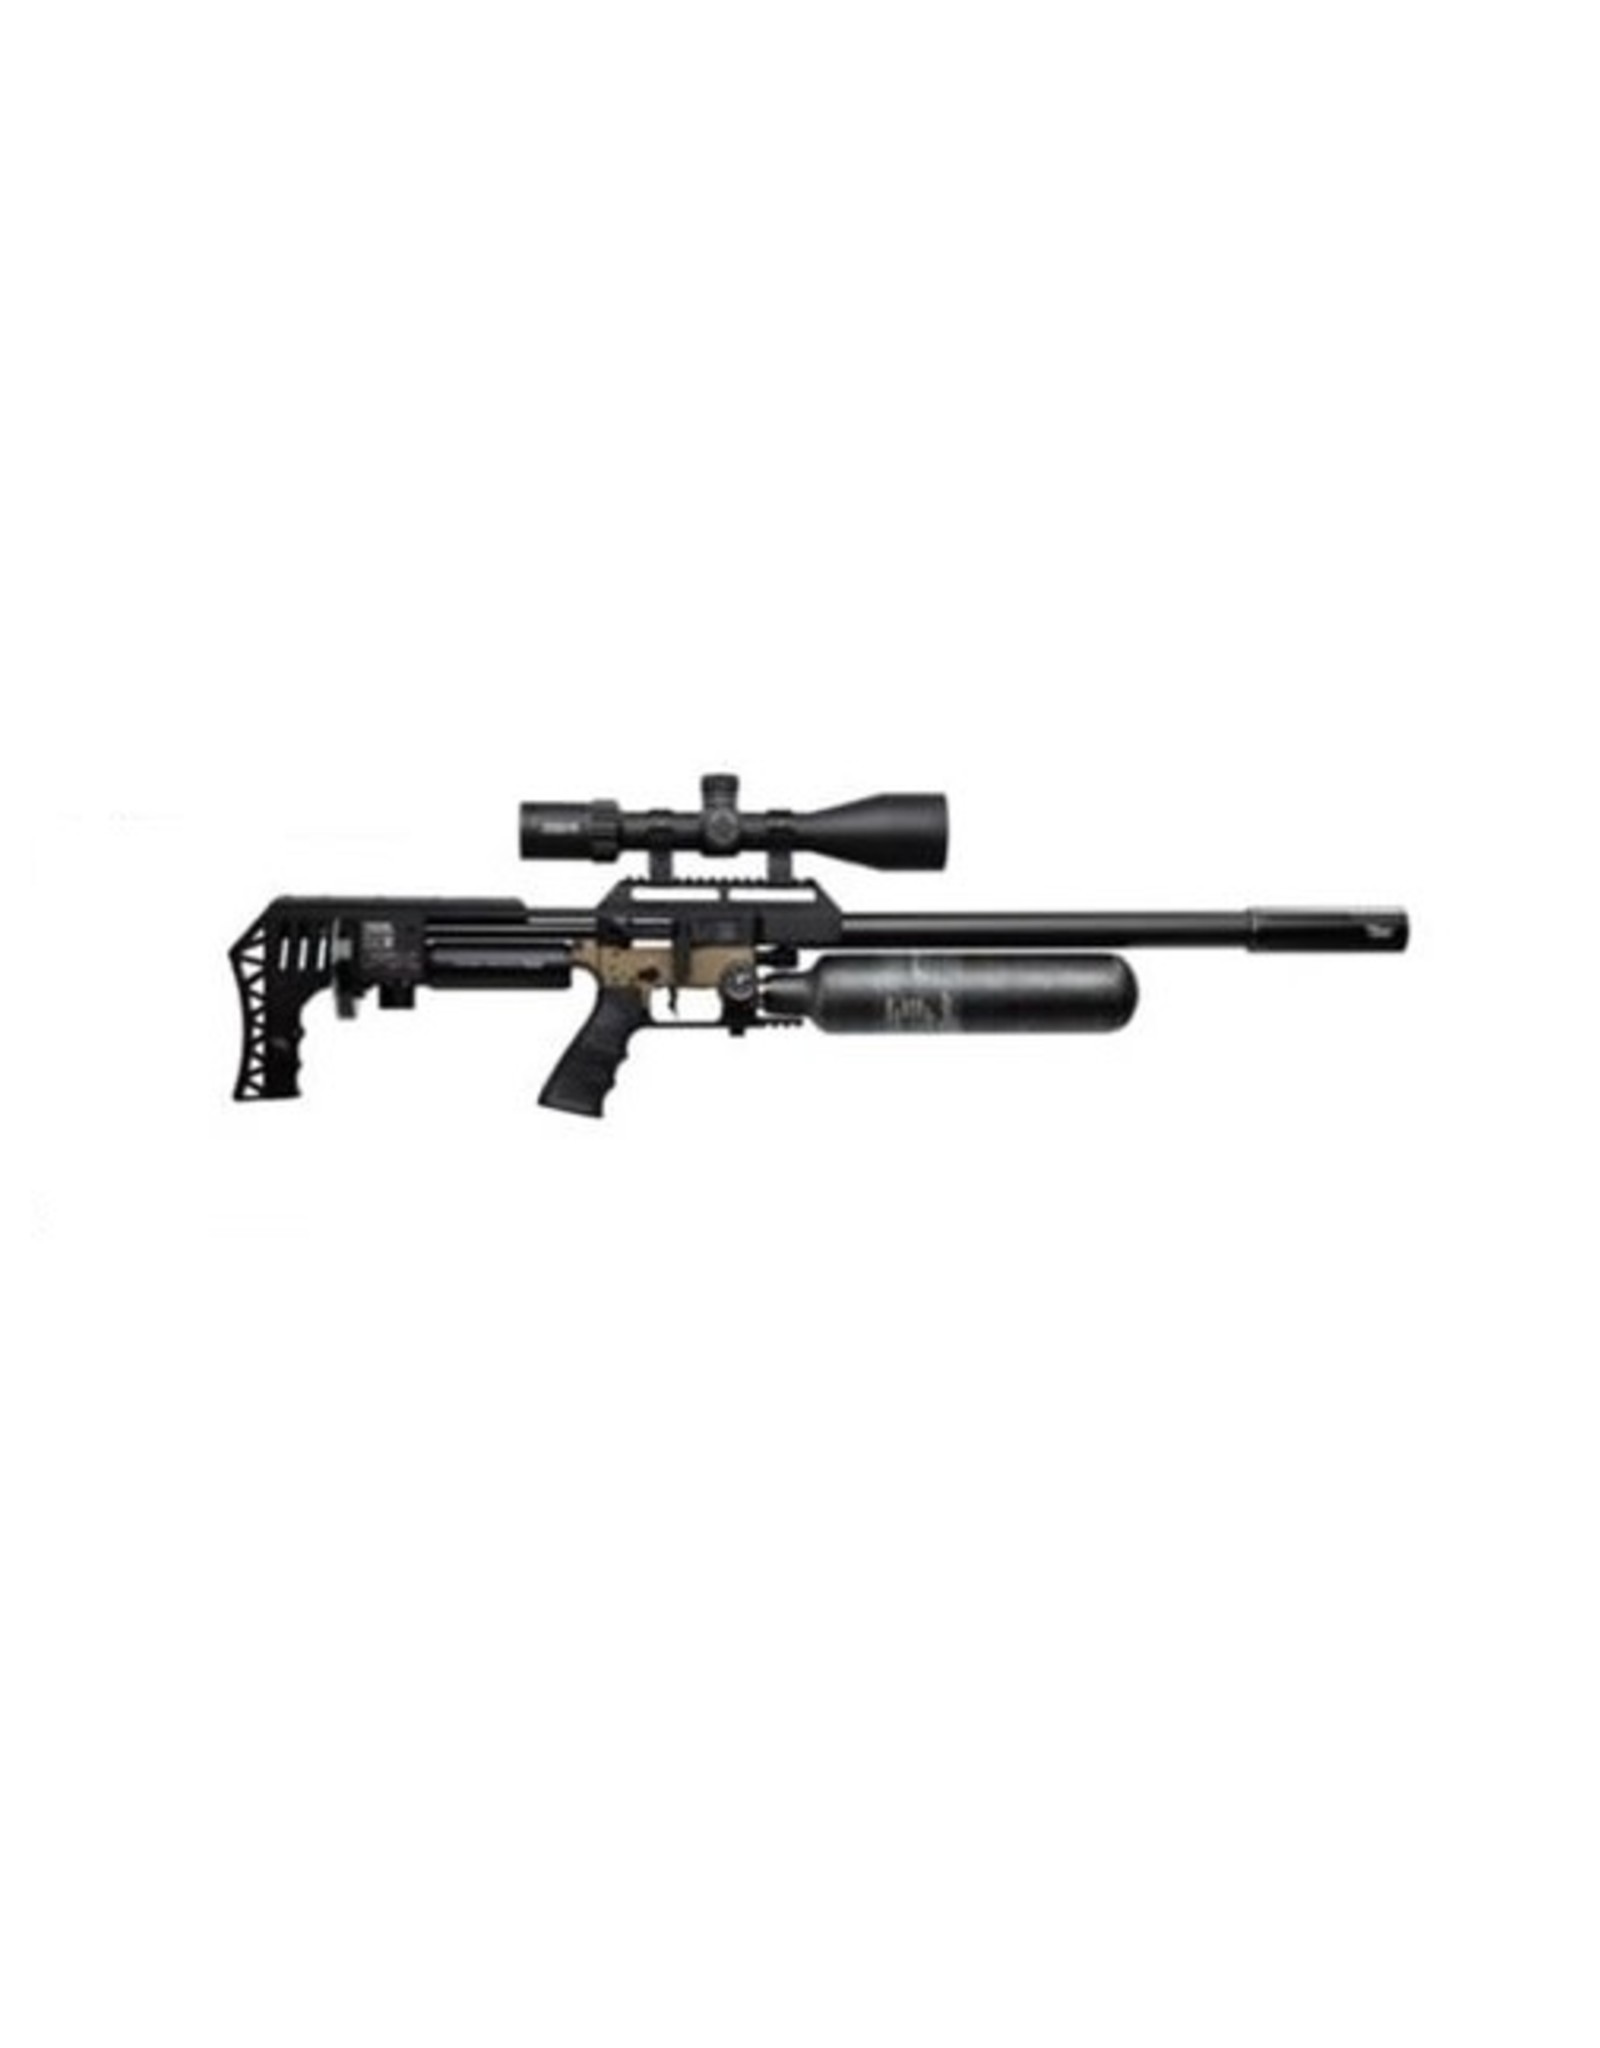 FX Airguns .30 CAL FX Impact M3 Sniper Air Rifle with 700mm Barrel and DonnyFL - Black